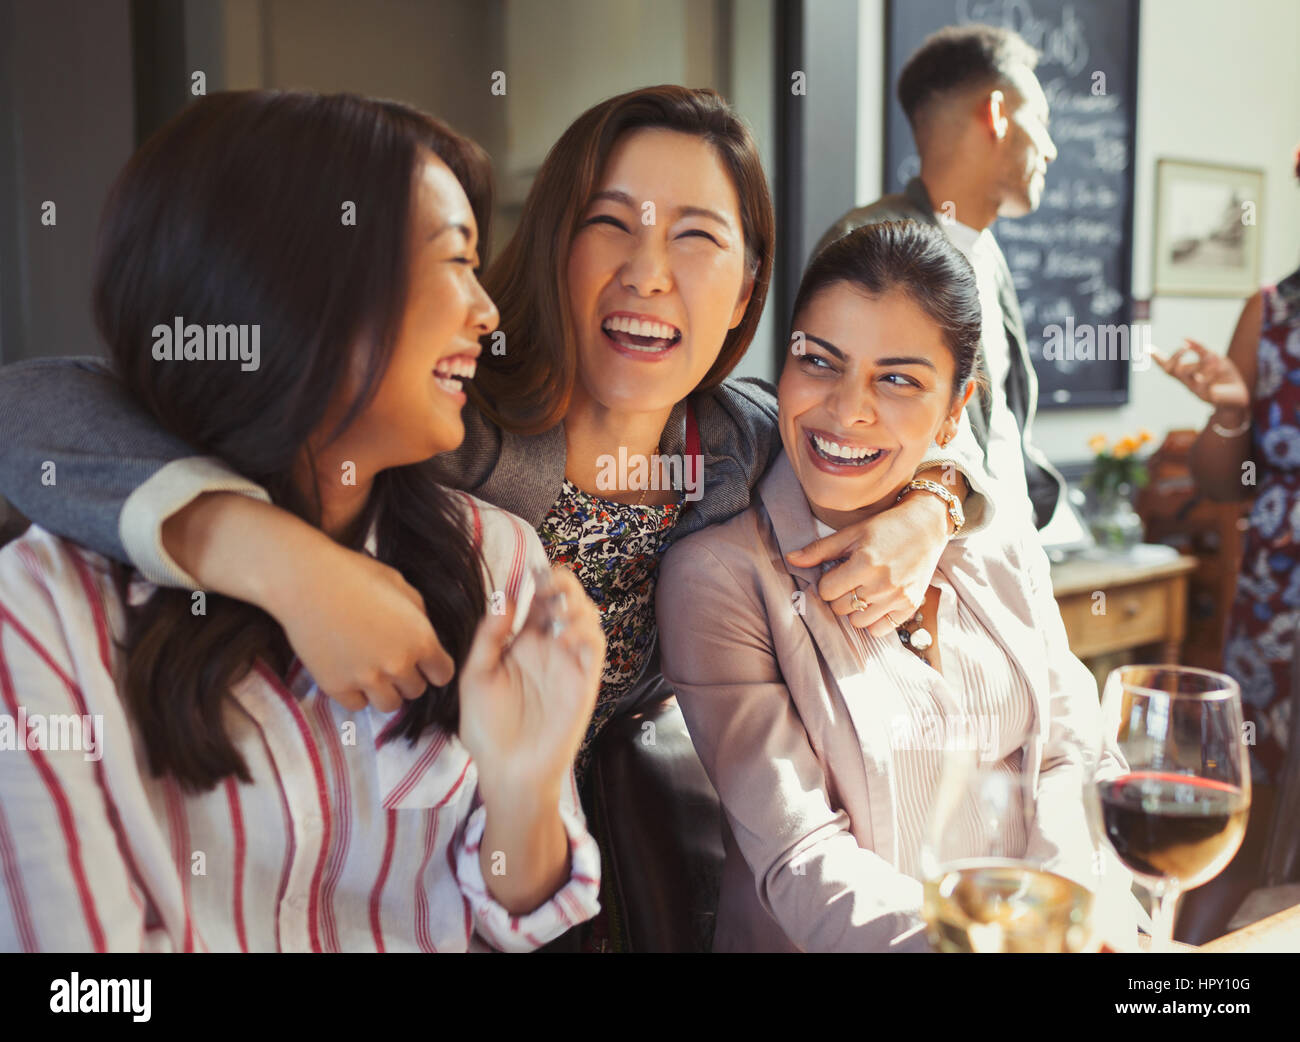 Enthusiastic, smiling women friends hugging and drinking at bar Stock Photo